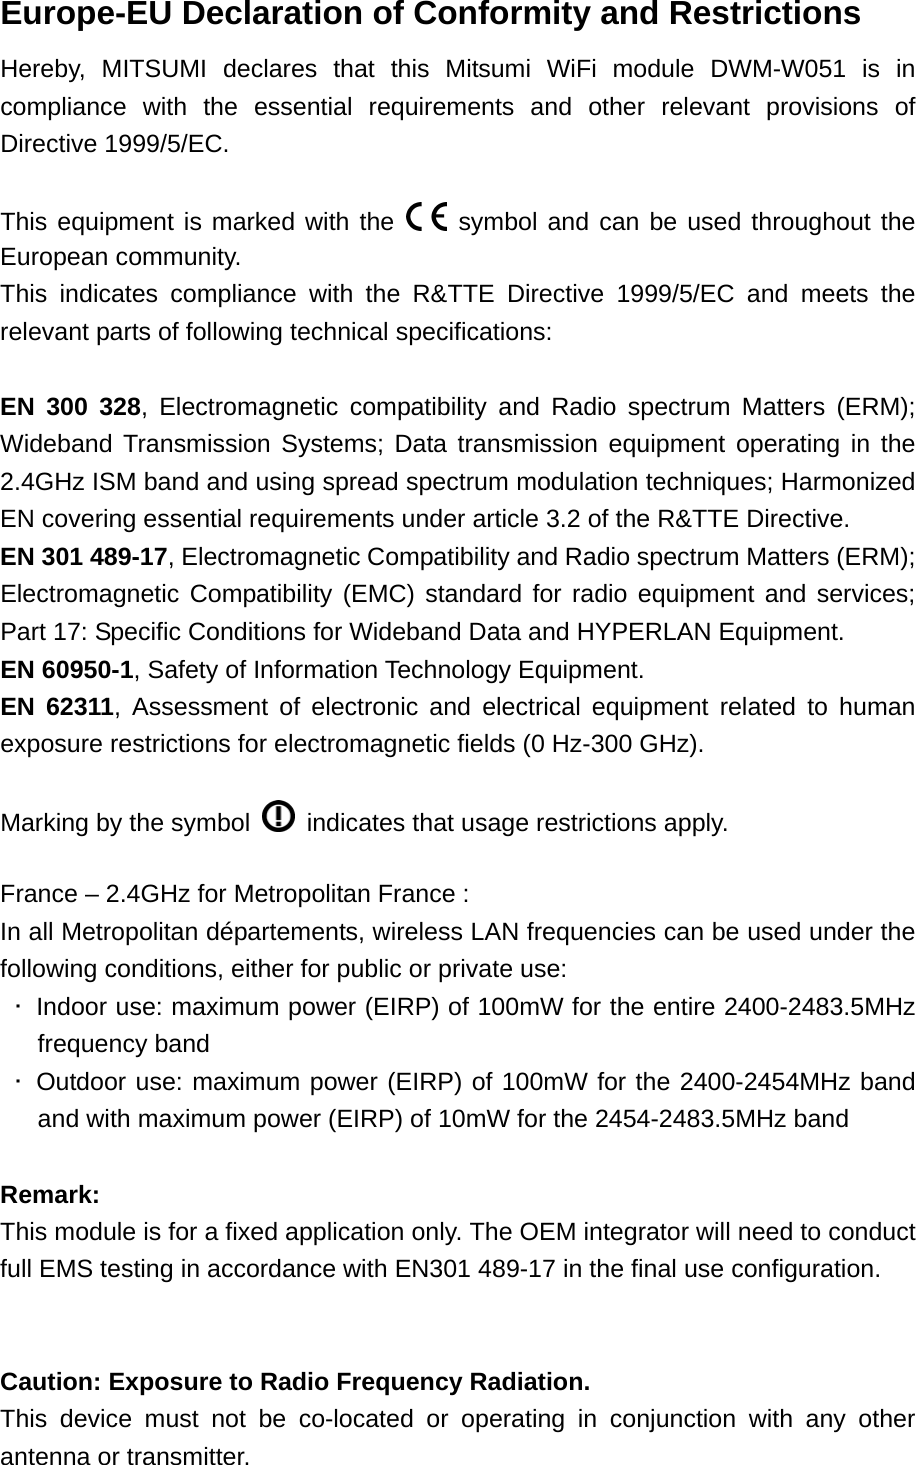 Europe-EU Declaration of Conformity and Restrictions Hereby, MITSUMI declares that this Mitsumi WiFi module DWM-W051 is in compliance with the essential requirements and other relevant provisions of Directive 1999/5/EC.  This equipment is marked with the   symbol and can be used throughout the European community. This indicates compliance with the R&amp;TTE Directive 1999/5/EC and meets the relevant parts of following technical specifications:  EN 300 328, Electromagnetic compatibility and Radio spectrum Matters (ERM); Wideband Transmission Systems; Data transmission equipment operating in the 2.4GHz ISM band and using spread spectrum modulation techniques; Harmonized EN covering essential requirements under article 3.2 of the R&amp;TTE Directive. EN 301 489-17, Electromagnetic Compatibility and Radio spectrum Matters (ERM); Electromagnetic Compatibility (EMC) standard for radio equipment and services; Part 17: Specific Conditions for Wideband Data and HYPERLAN Equipment. EN 60950-1, Safety of Information Technology Equipment. EN 62311, Assessment of electronic and electrical equipment related to human exposure restrictions for electromagnetic fields (0 Hz-300 GHz).  Marking by the symbol    indicates that usage restrictions apply.  France – 2.4GHz for Metropolitan France : In all Metropolitan départements, wireless LAN frequencies can be used under the following conditions, either for public or private use:  ･  Indoor use: maximum power (EIRP) of 100mW for the entire 2400-2483.5MHz frequency band  ･ Outdoor use: maximum power (EIRP) of 100mW for the 2400-2454MHz band and with maximum power (EIRP) of 10mW for the 2454-2483.5MHz band  Remark:  This module is for a fixed application only. The OEM integrator will need to conduct full EMS testing in accordance with EN301 489-17 in the final use configuration.   Caution: Exposure to Radio Frequency Radiation. This device must not be co-located or operating in conjunction with any other antenna or transmitter.   